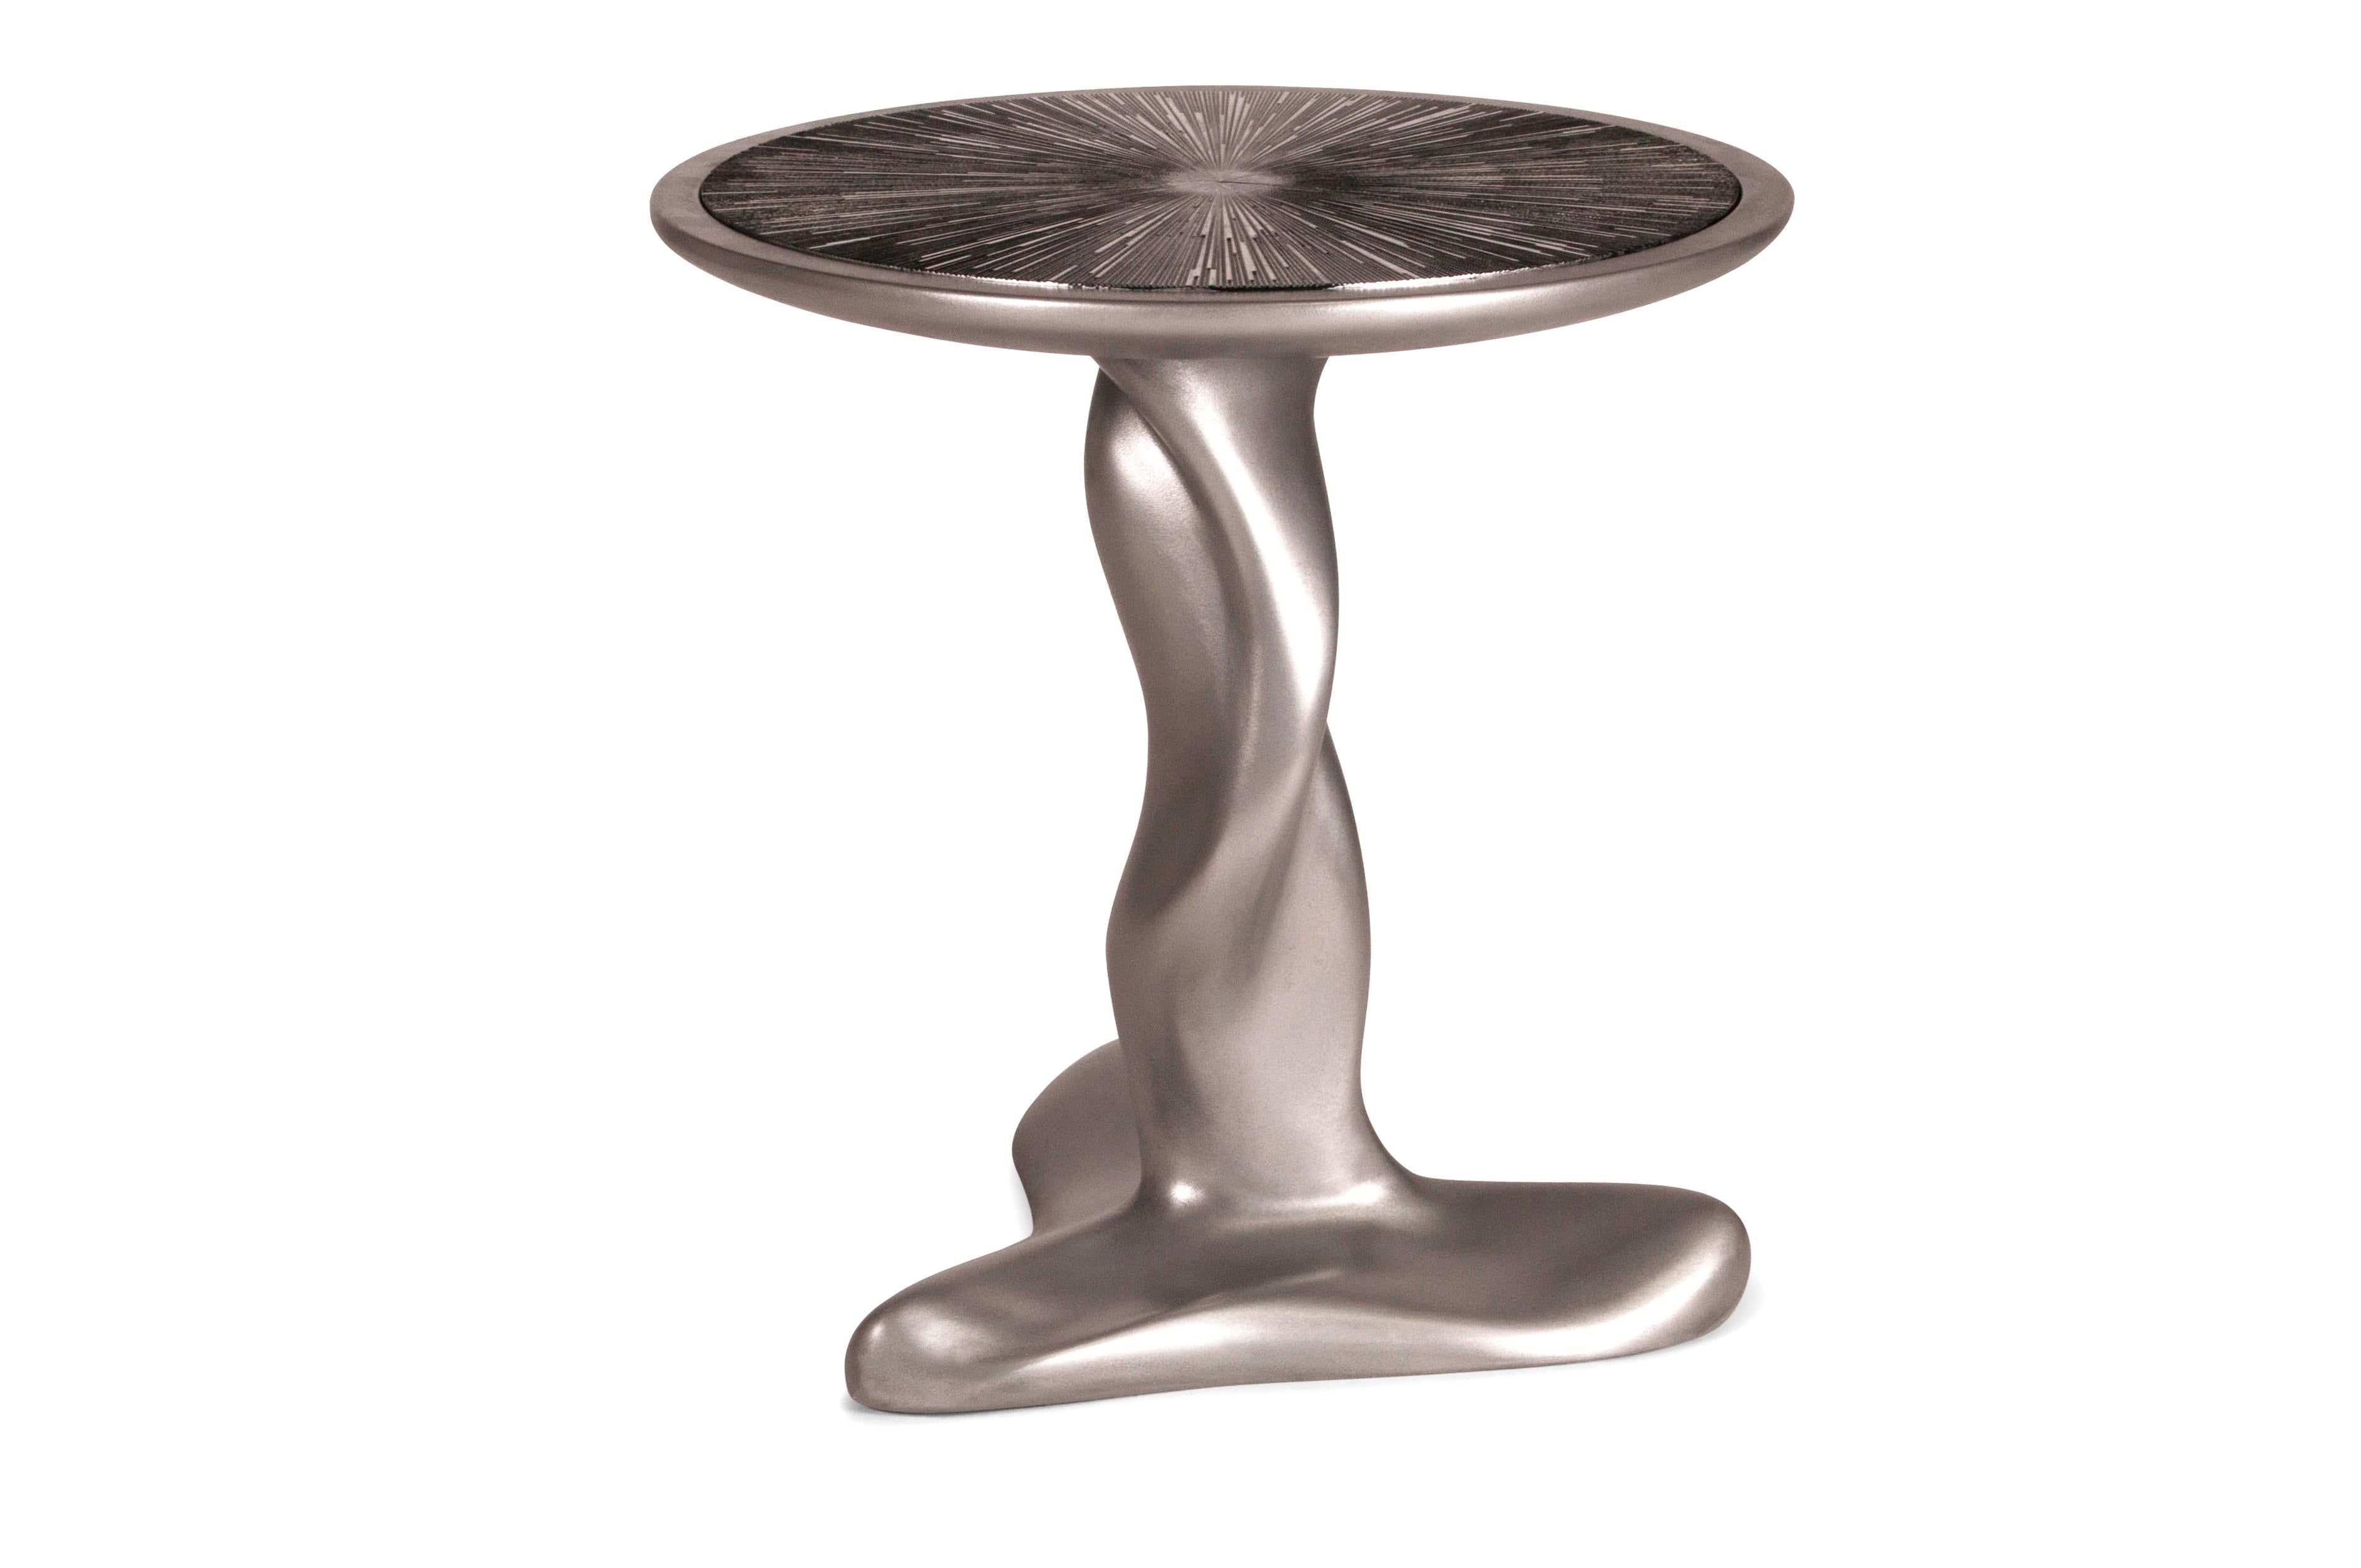 American Amorph Helios Side Table, Stainless Steel Finish, with Silver Leaf Top